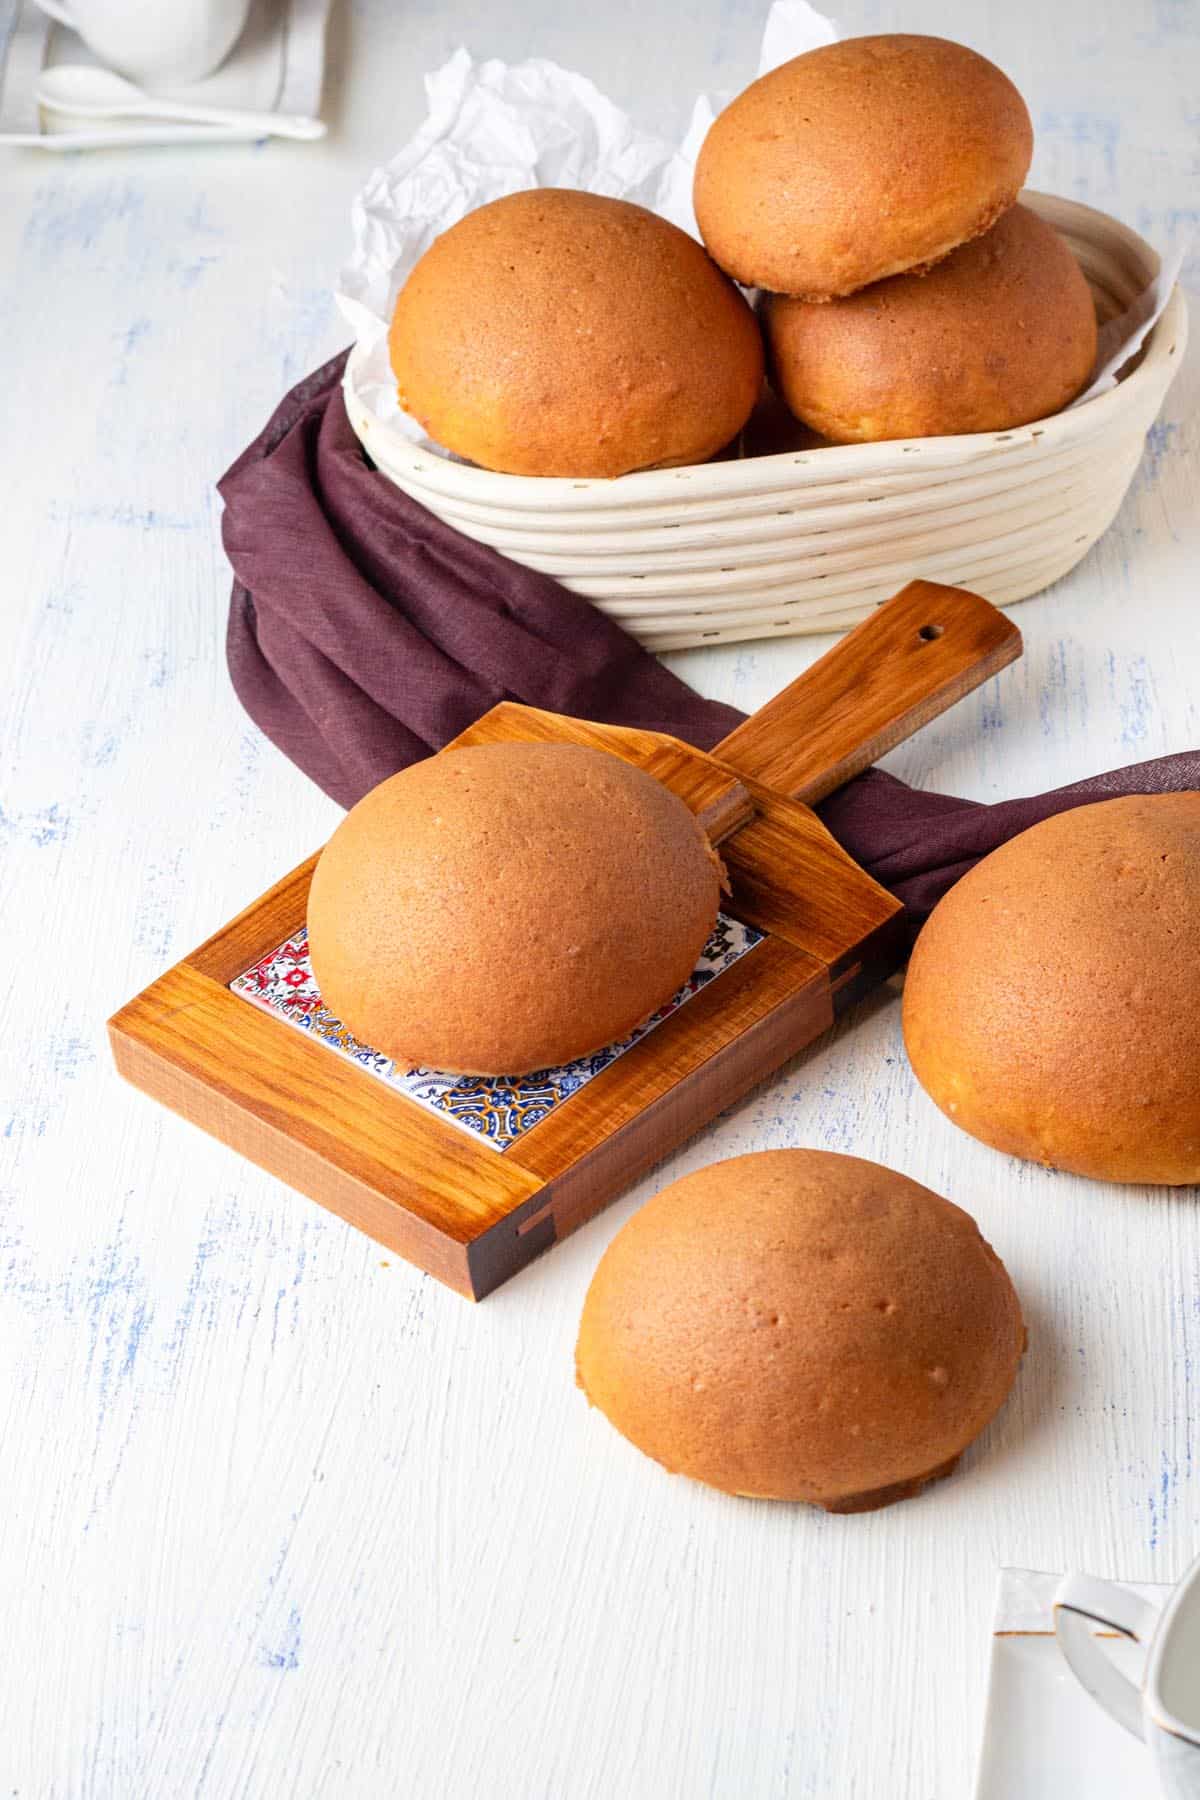 Mexican coffee buns inspired